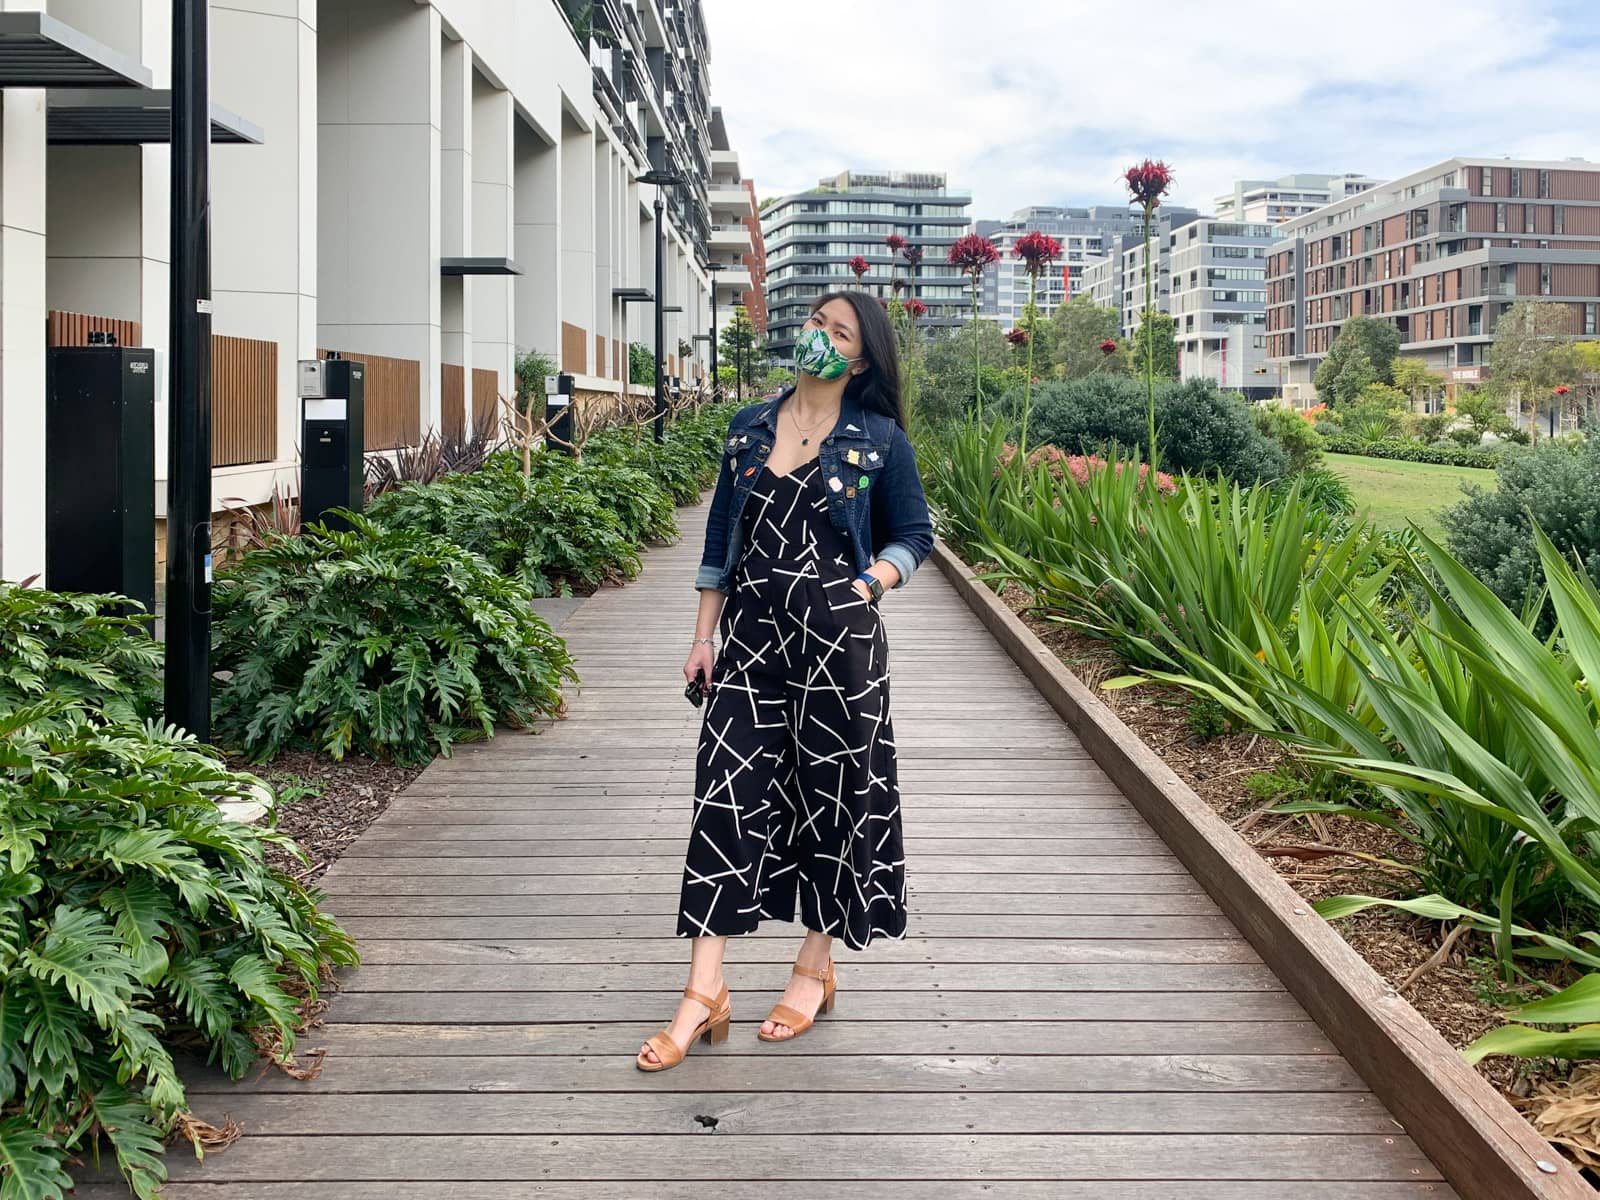 image 4: A woman with long dark hair, wearing a wide leg black jumpsuit with white geometric lines on it. She is wearing a denim jacket over the jumpsuit and has one hand in a pocket. She is wearing tan sandals, and also wearing a face mask with a leaf print. In the background is a wooden boardwalk, with apartments down one side and plants and grass on the other.